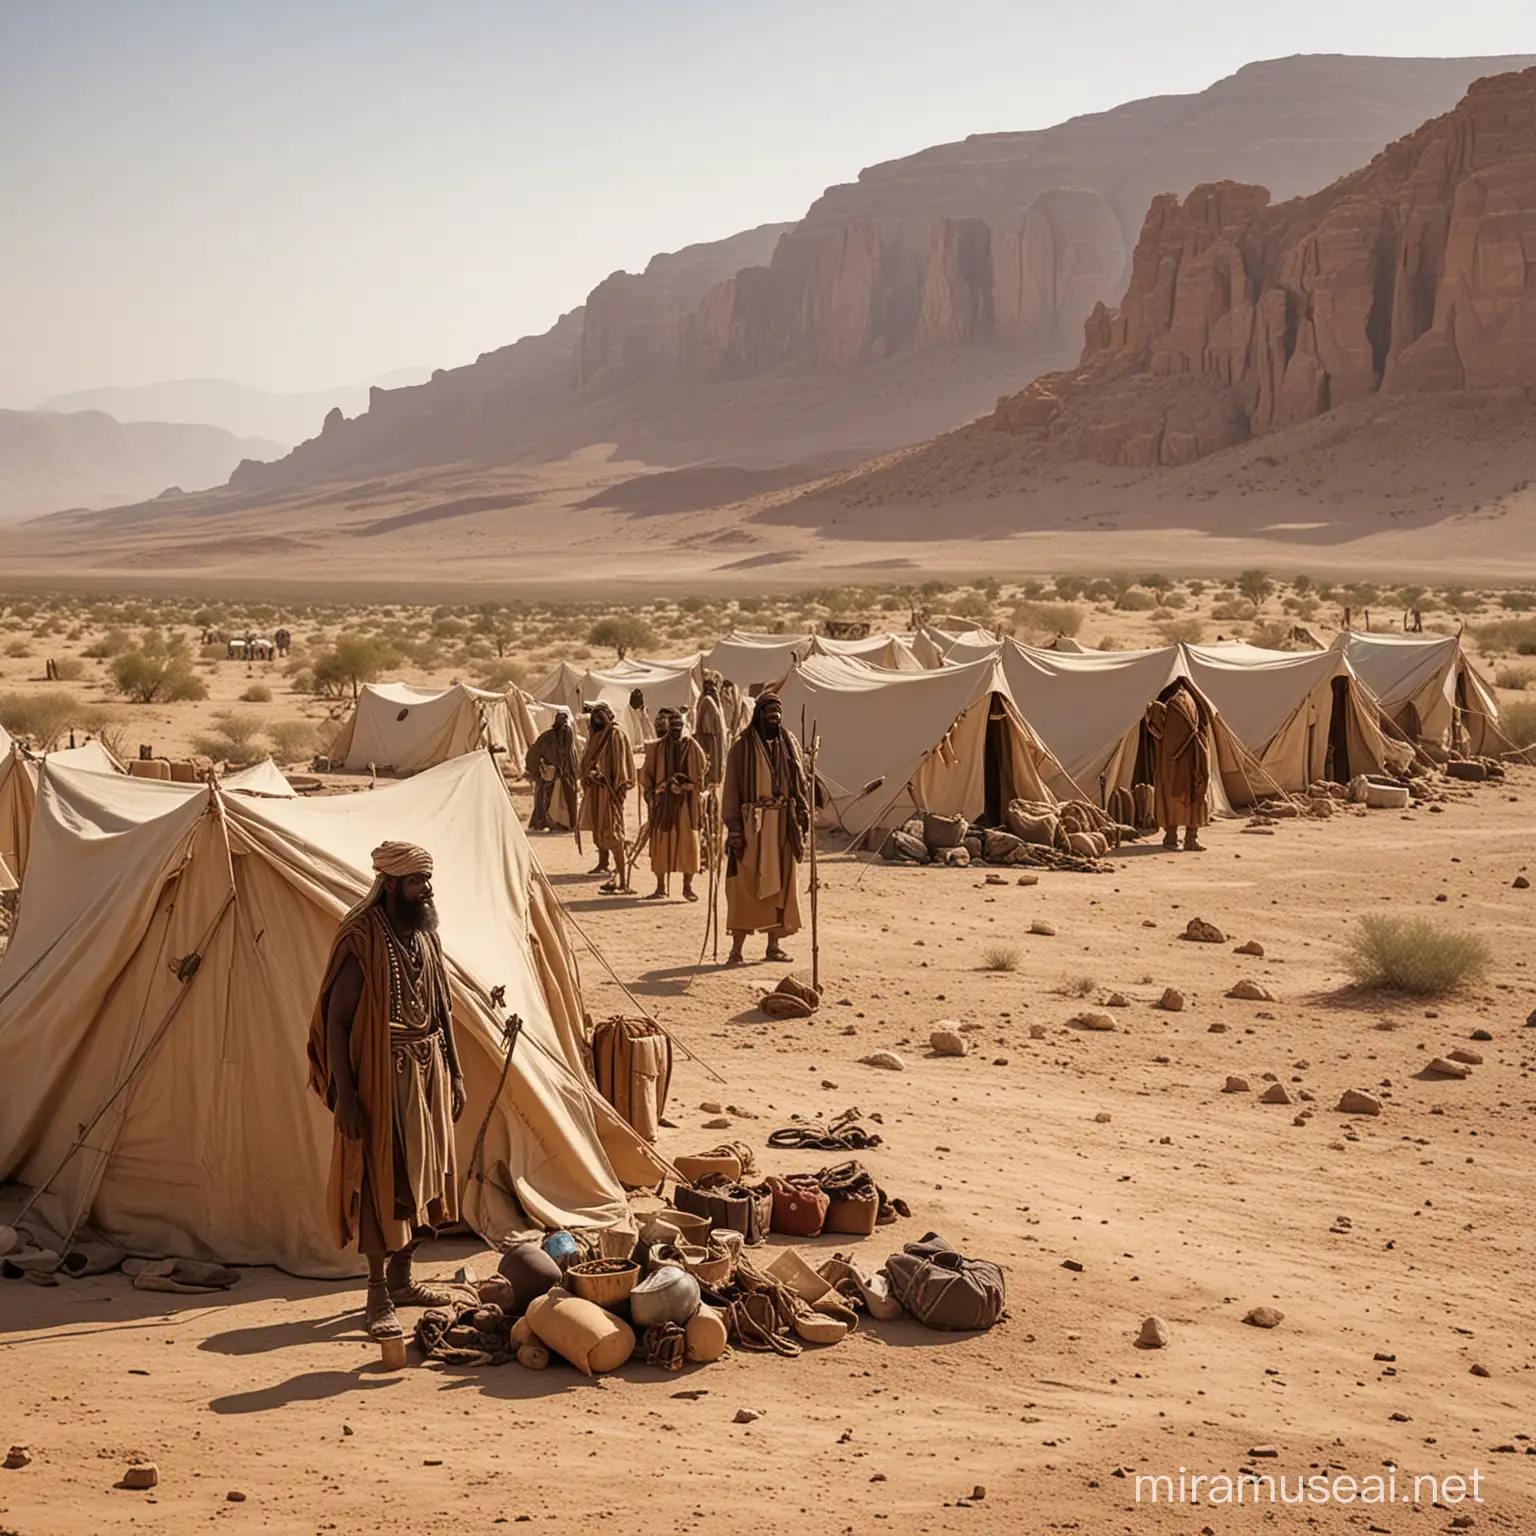 Ancient hebrew israelite in desert with encampment in background and desolate surroundings.